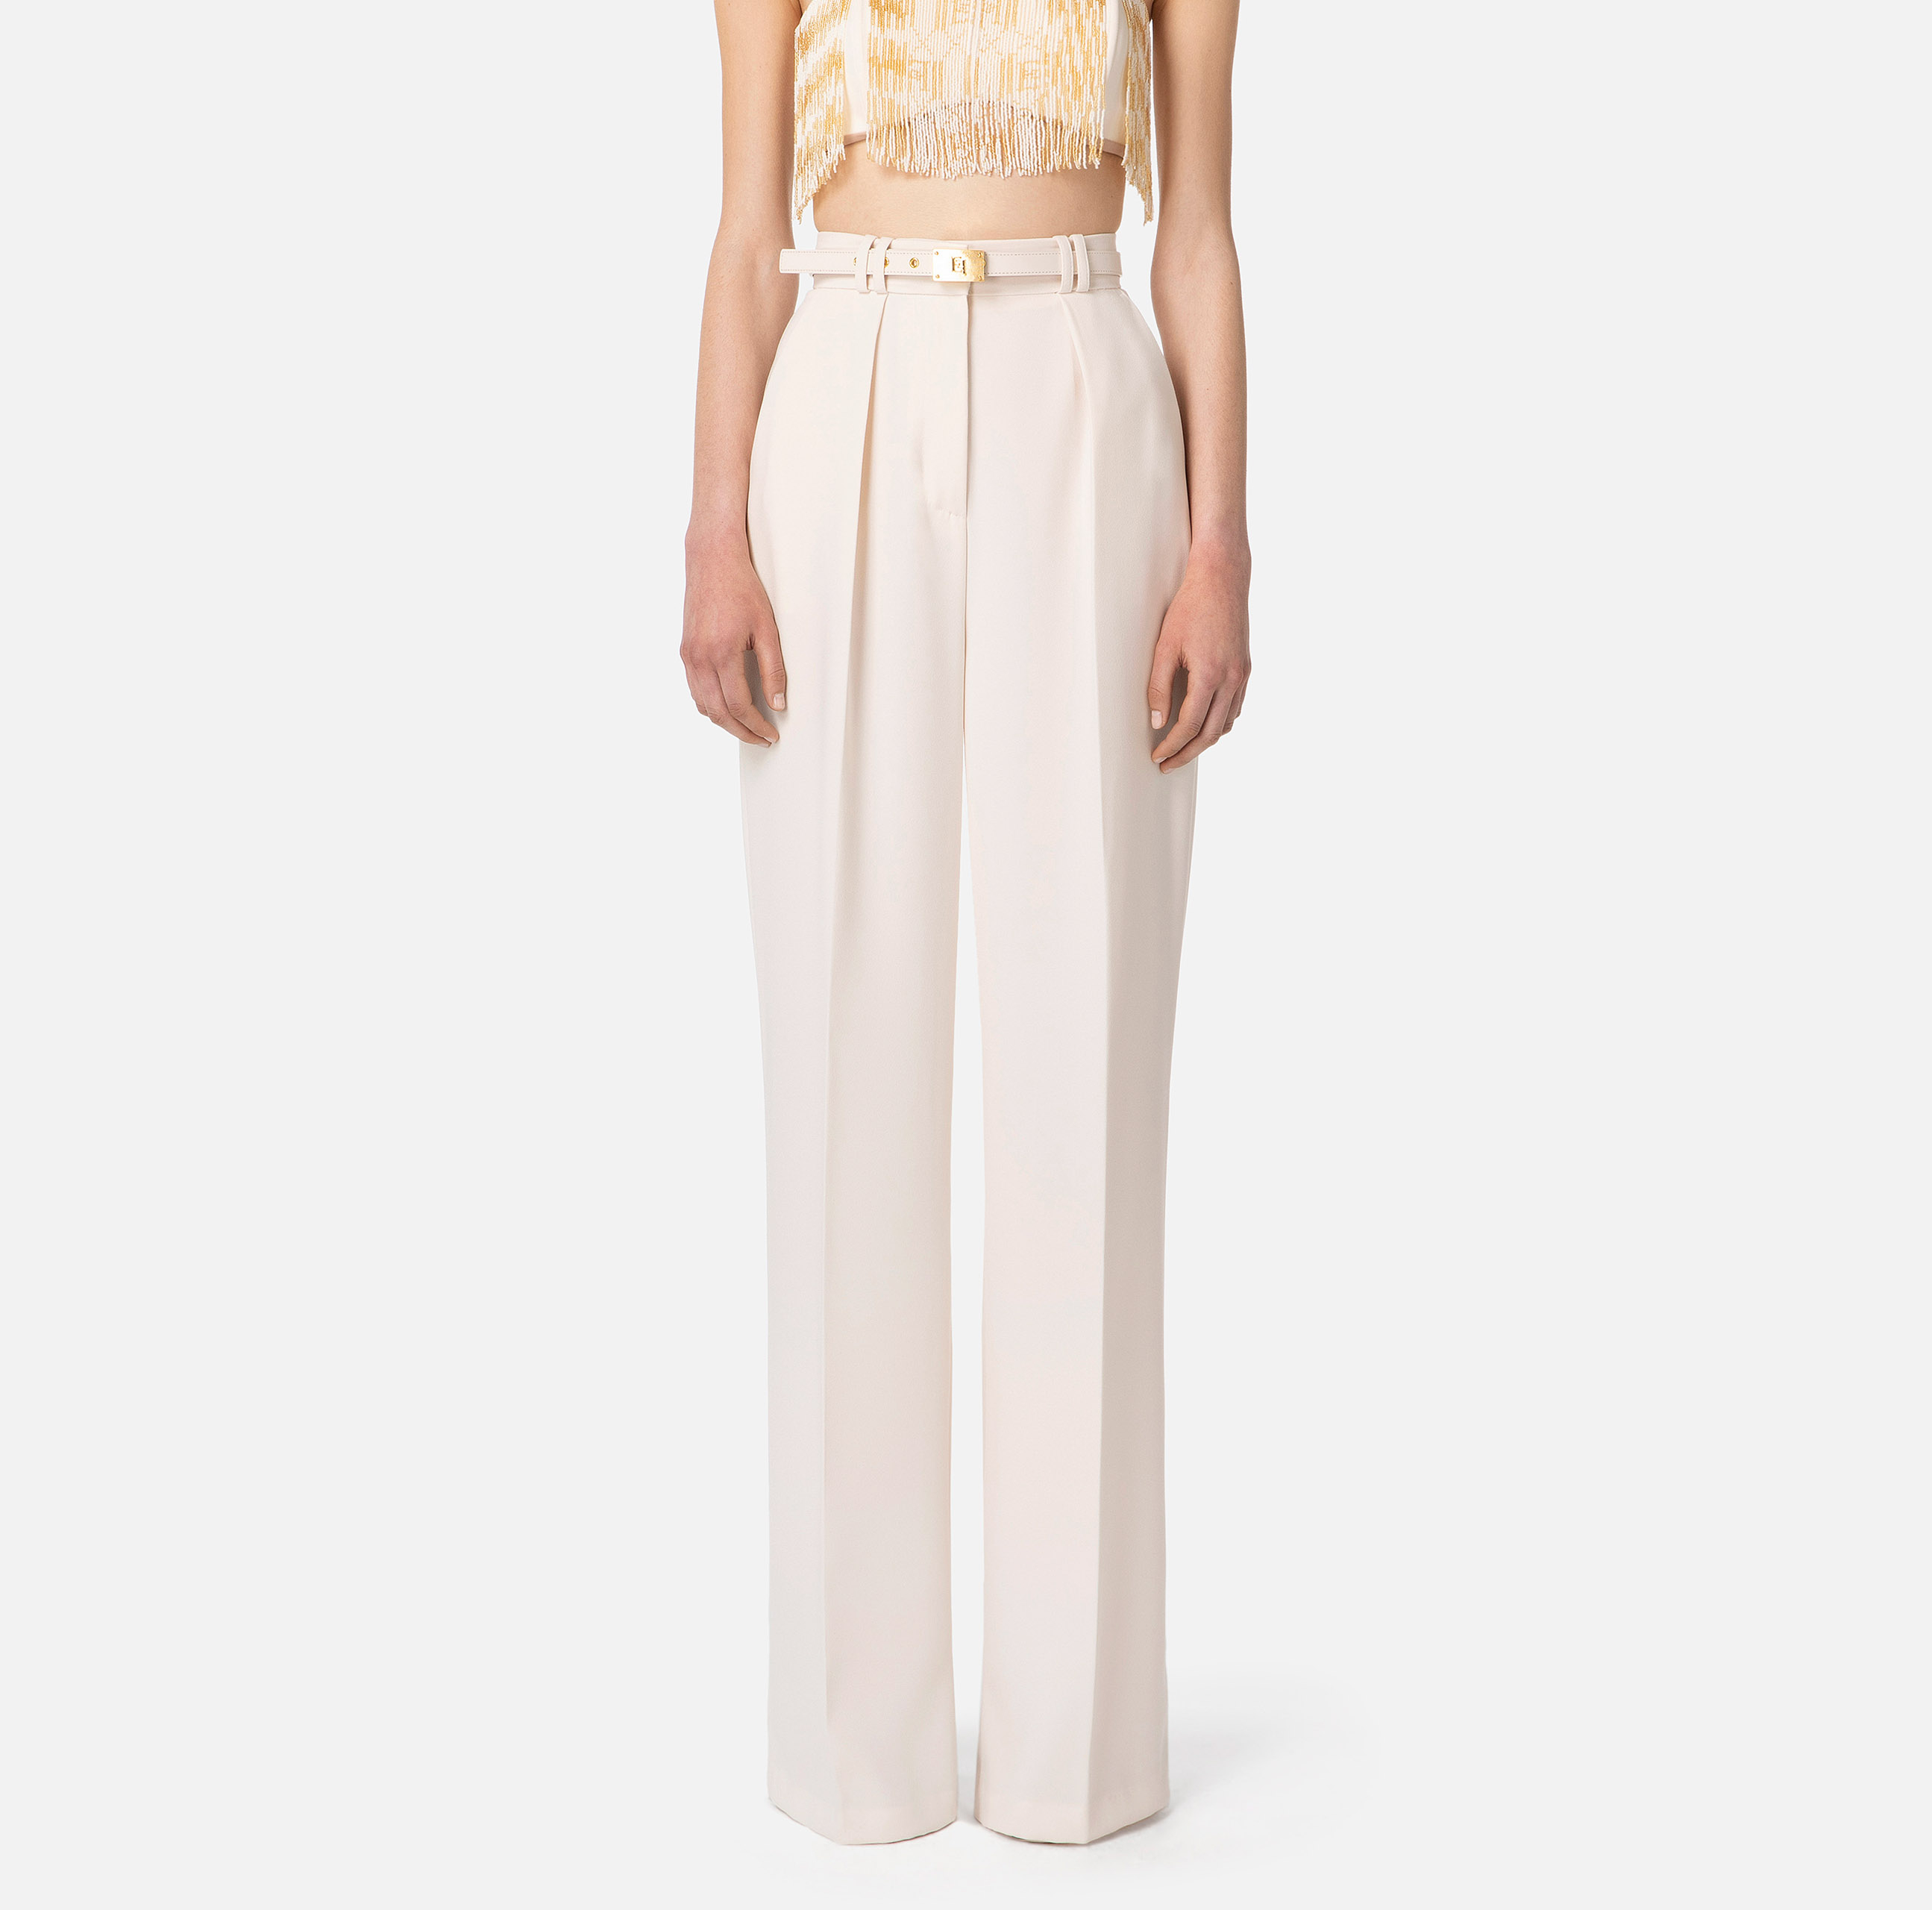 Palazzo trousers in crêpe fabric with belt - Elisabetta Franchi